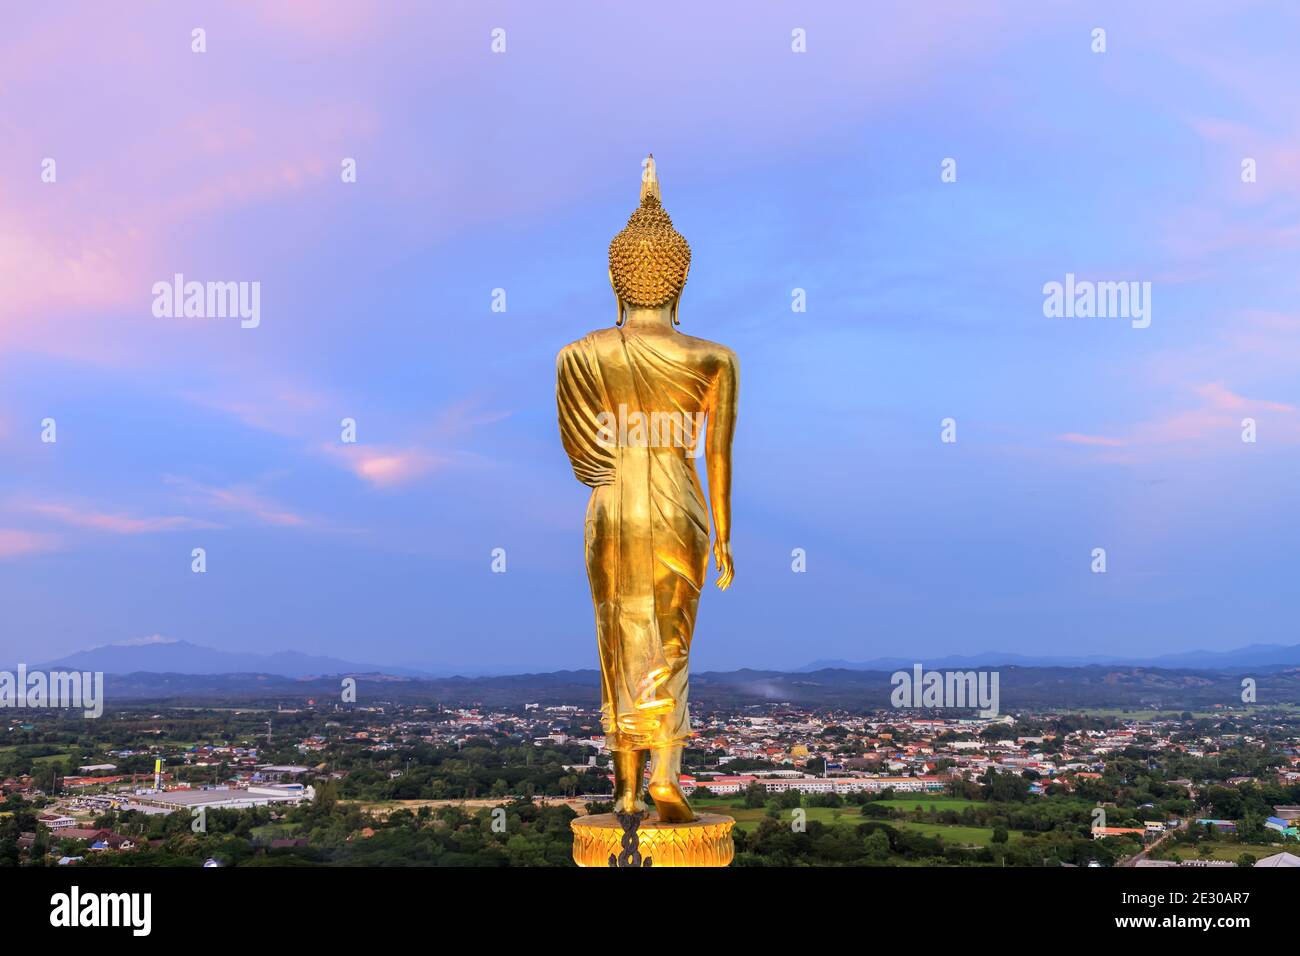 Golden walking Buddha statue on hill or mountain to at Wat Phrathat Khao Noi temple during twilight, Nan province, Thailand Stock Photo